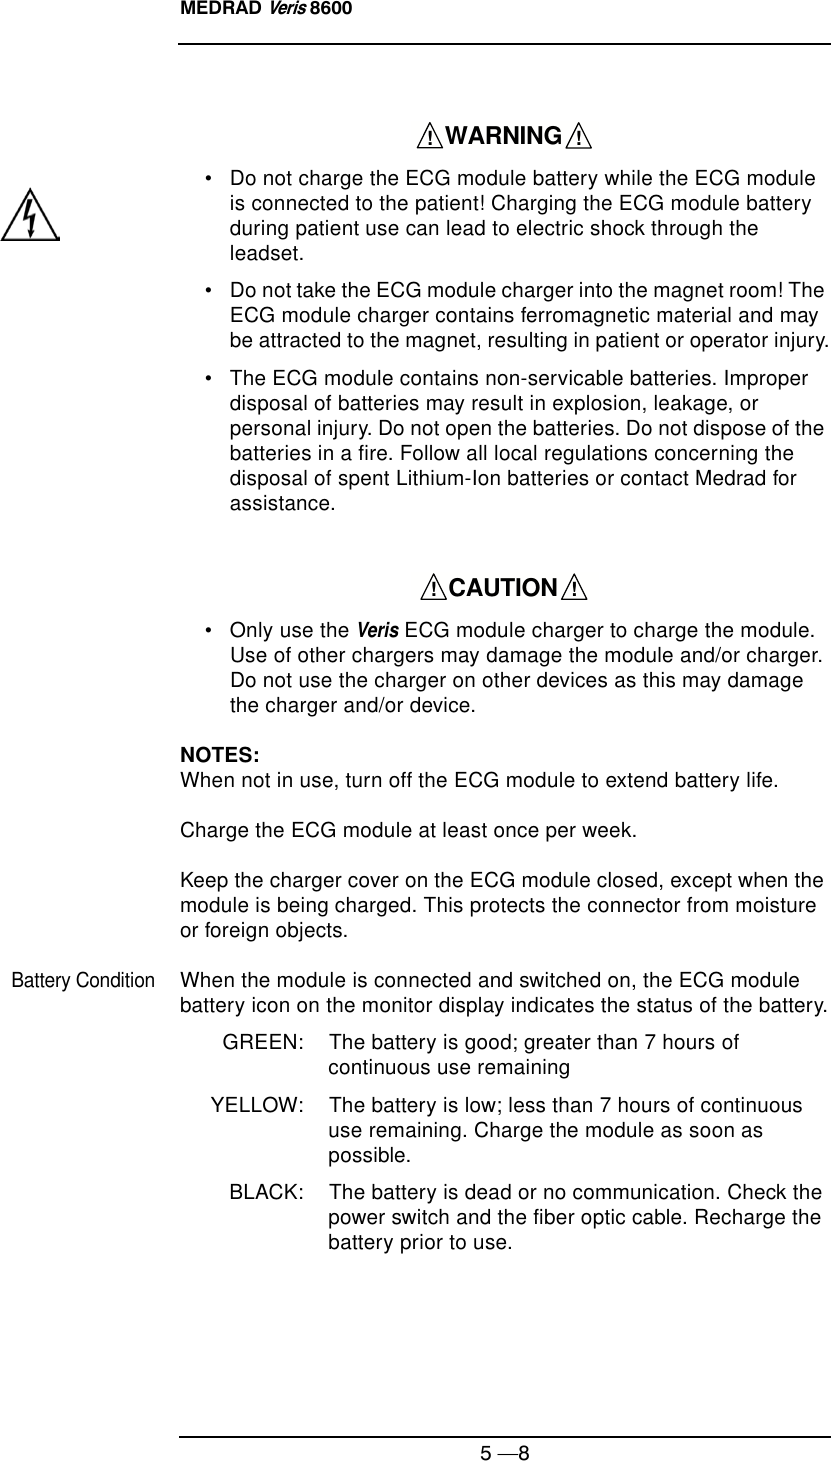 MEDRAD Veris 86005 —8• Do not charge the ECG module battery while the ECG module is connected to the patient! Charging the ECG module battery during patient use can lead to electric shock through the leadset.• Do not take the ECG module charger into the magnet room! The ECG module charger contains ferromagnetic material and may be attracted to the magnet, resulting in patient or operator injury.• The ECG module contains non-servicable batteries. Improper disposal of batteries may result in explosion, leakage, or personal injury. Do not open the batteries. Do not dispose of the batteries in a fire. Follow all local regulations concerning the disposal of spent Lithium-Ion batteries or contact Medrad for assistance.• Only use the Veris ECG module charger to charge the module. Use of other chargers may damage the module and/or charger. Do not use the charger on other devices as this may damage the charger and/or device.NOTES: When not in use, turn off the ECG module to extend battery life.  Charge the ECG module at least once per week.  Keep the charger cover on the ECG module closed, except when the module is being charged. This protects the connector from moisture or foreign objects.Battery ConditionWhen the module is connected and switched on, the ECG module battery icon on the monitor display indicates the status of the battery.GREEN: The battery is good; greater than 7 hours of continuous use remainingYELLOW: The battery is low; less than 7 hours of continuous use remaining. Charge the module as soon as possible.BLACK: The battery is dead or no communication. Check the power switch and the fiber optic cable. Recharge the battery prior to use.    WARNING    !!    CAUTION    !!